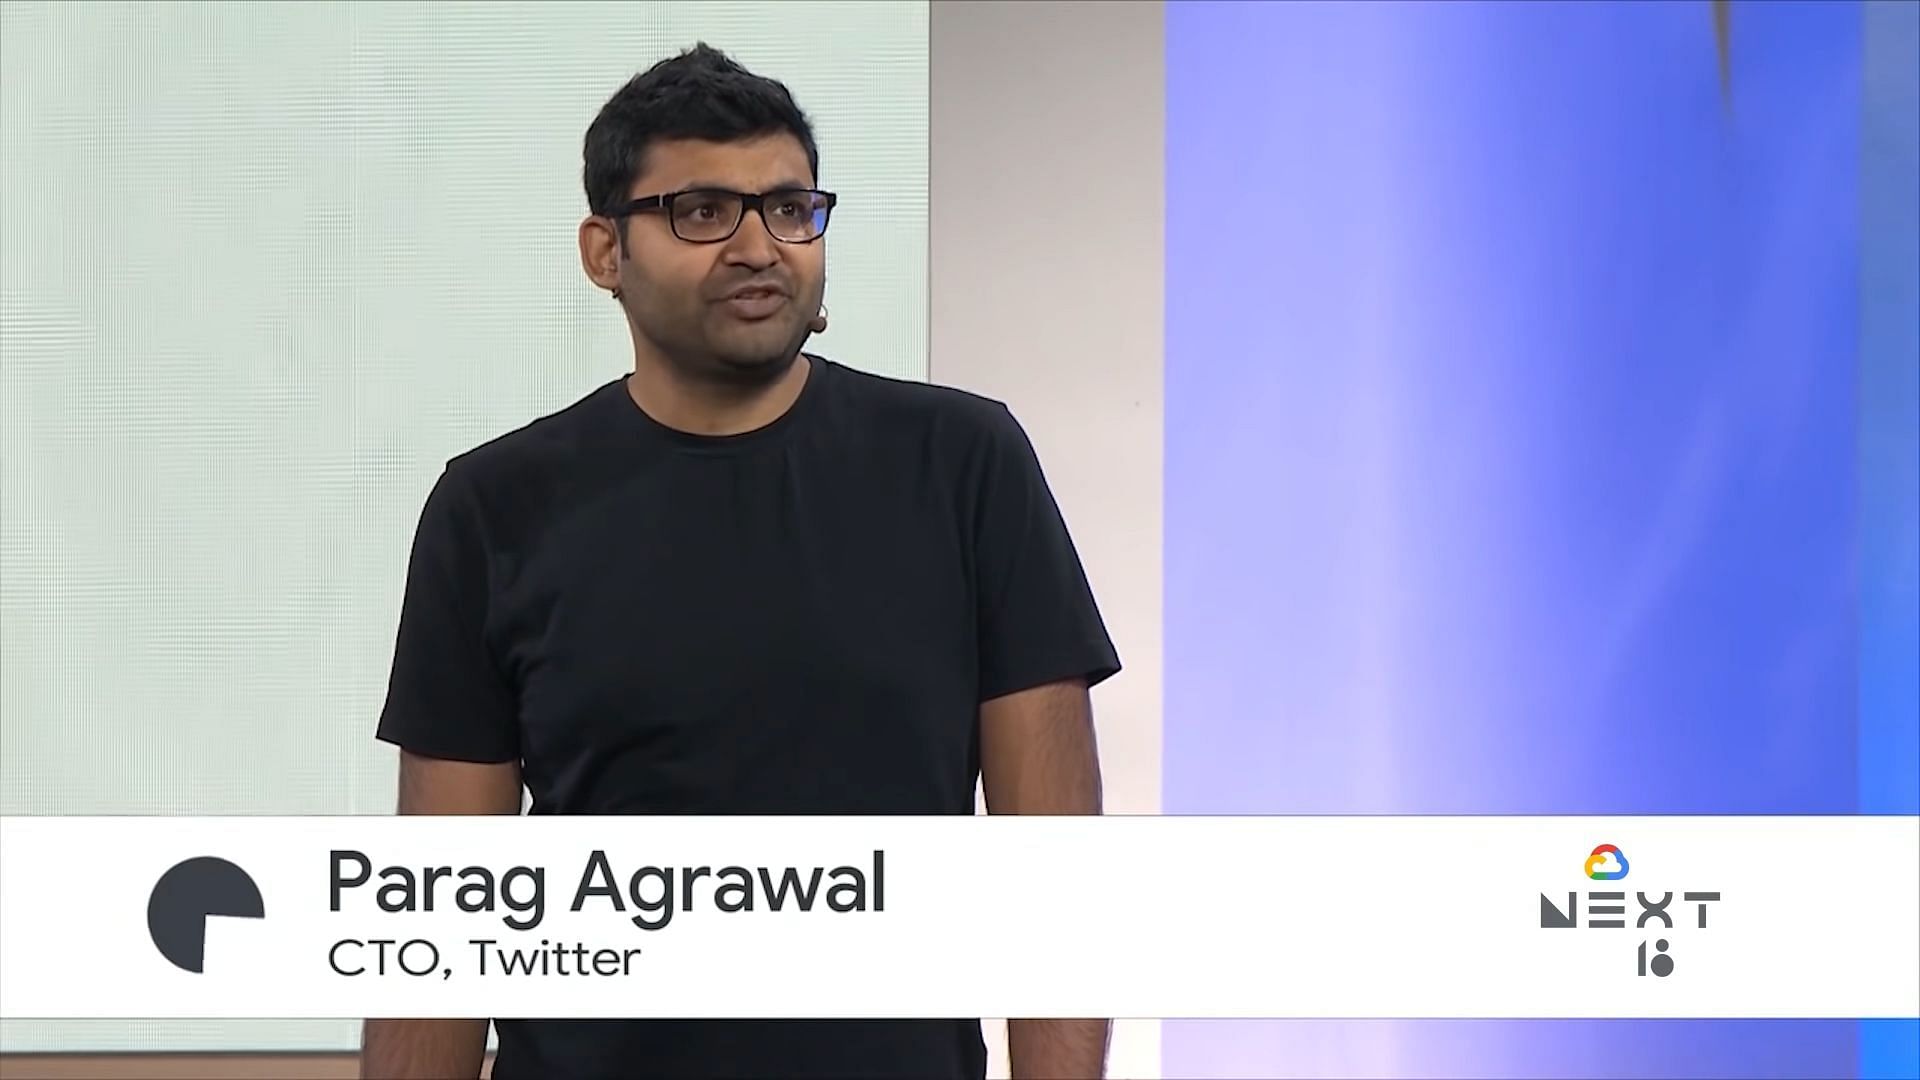 Parag Agarwal Announces Twitter Collaboration with Google Cloud (Image via Google Cloud / YouTube)